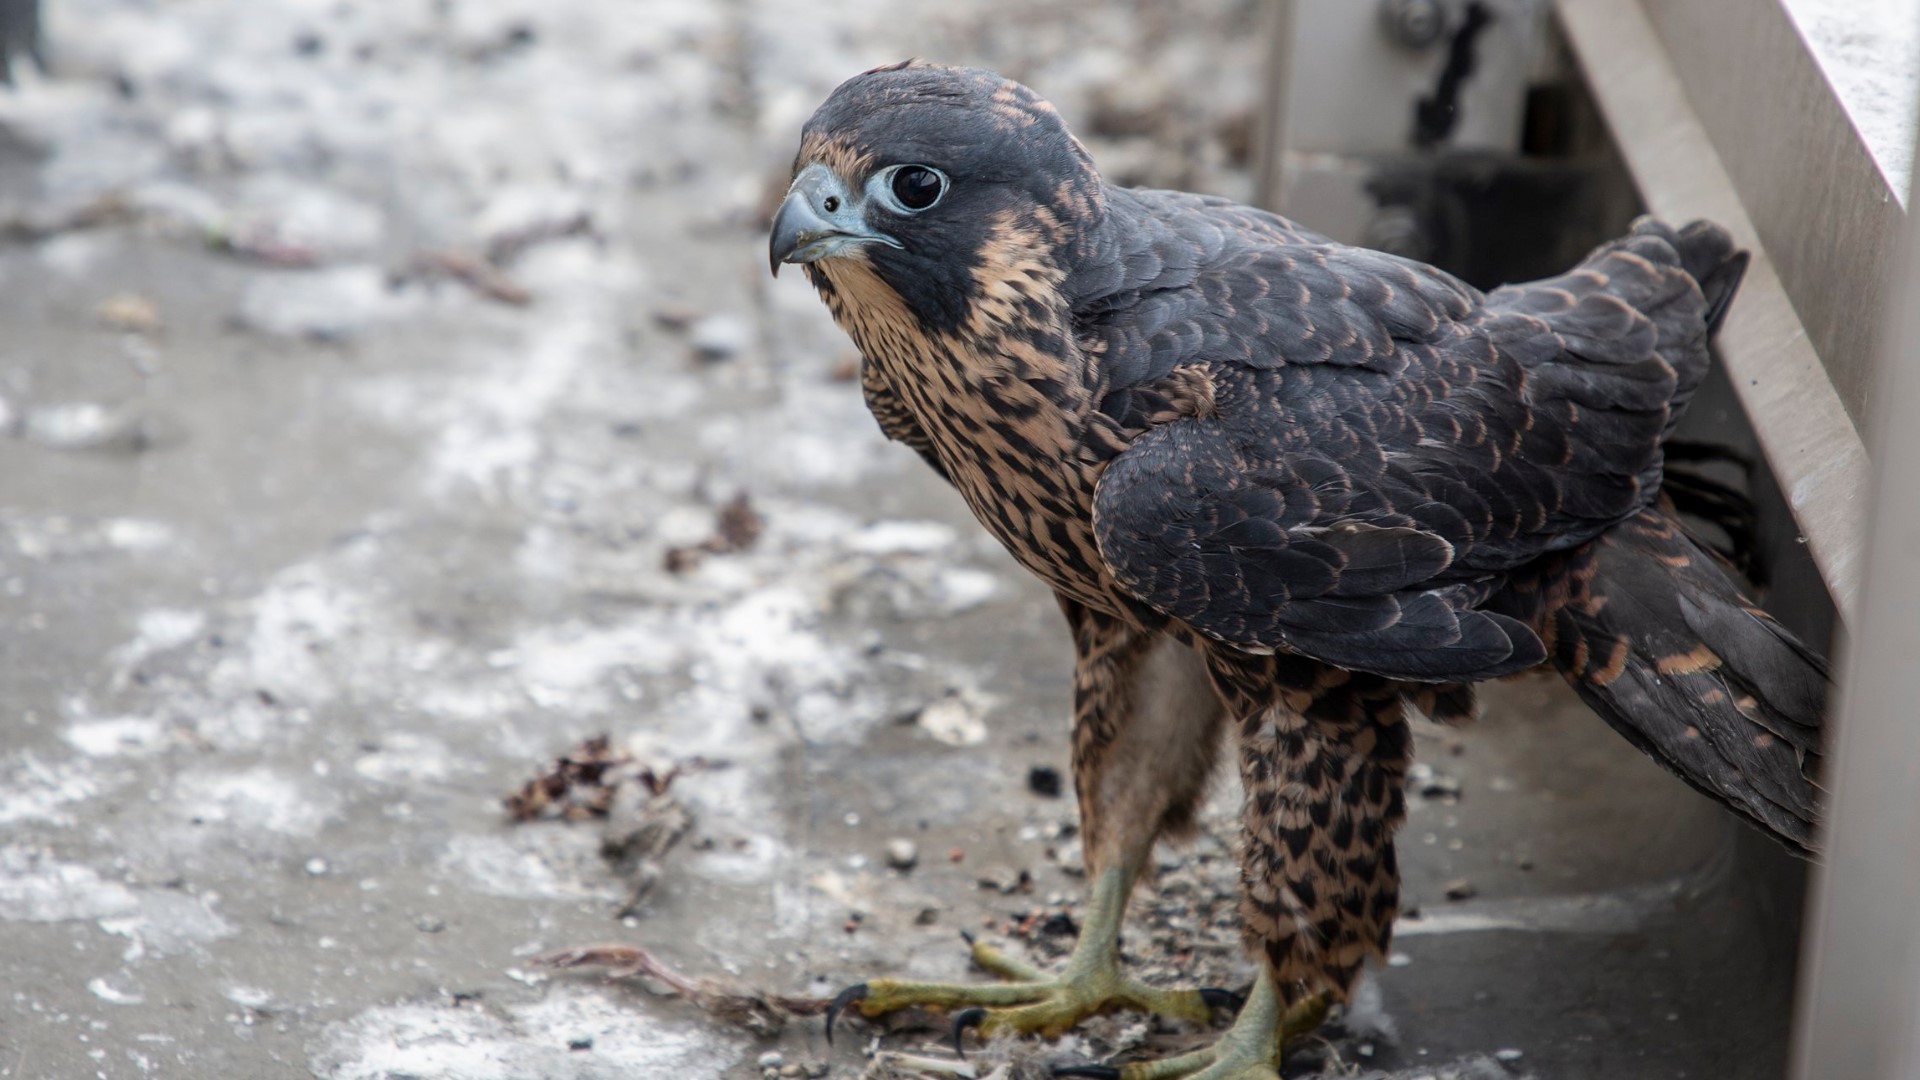 Wildlife Care Association brought back UC Davis' peregrine falcon after it was found harrassed by crows a block away from the medical center.